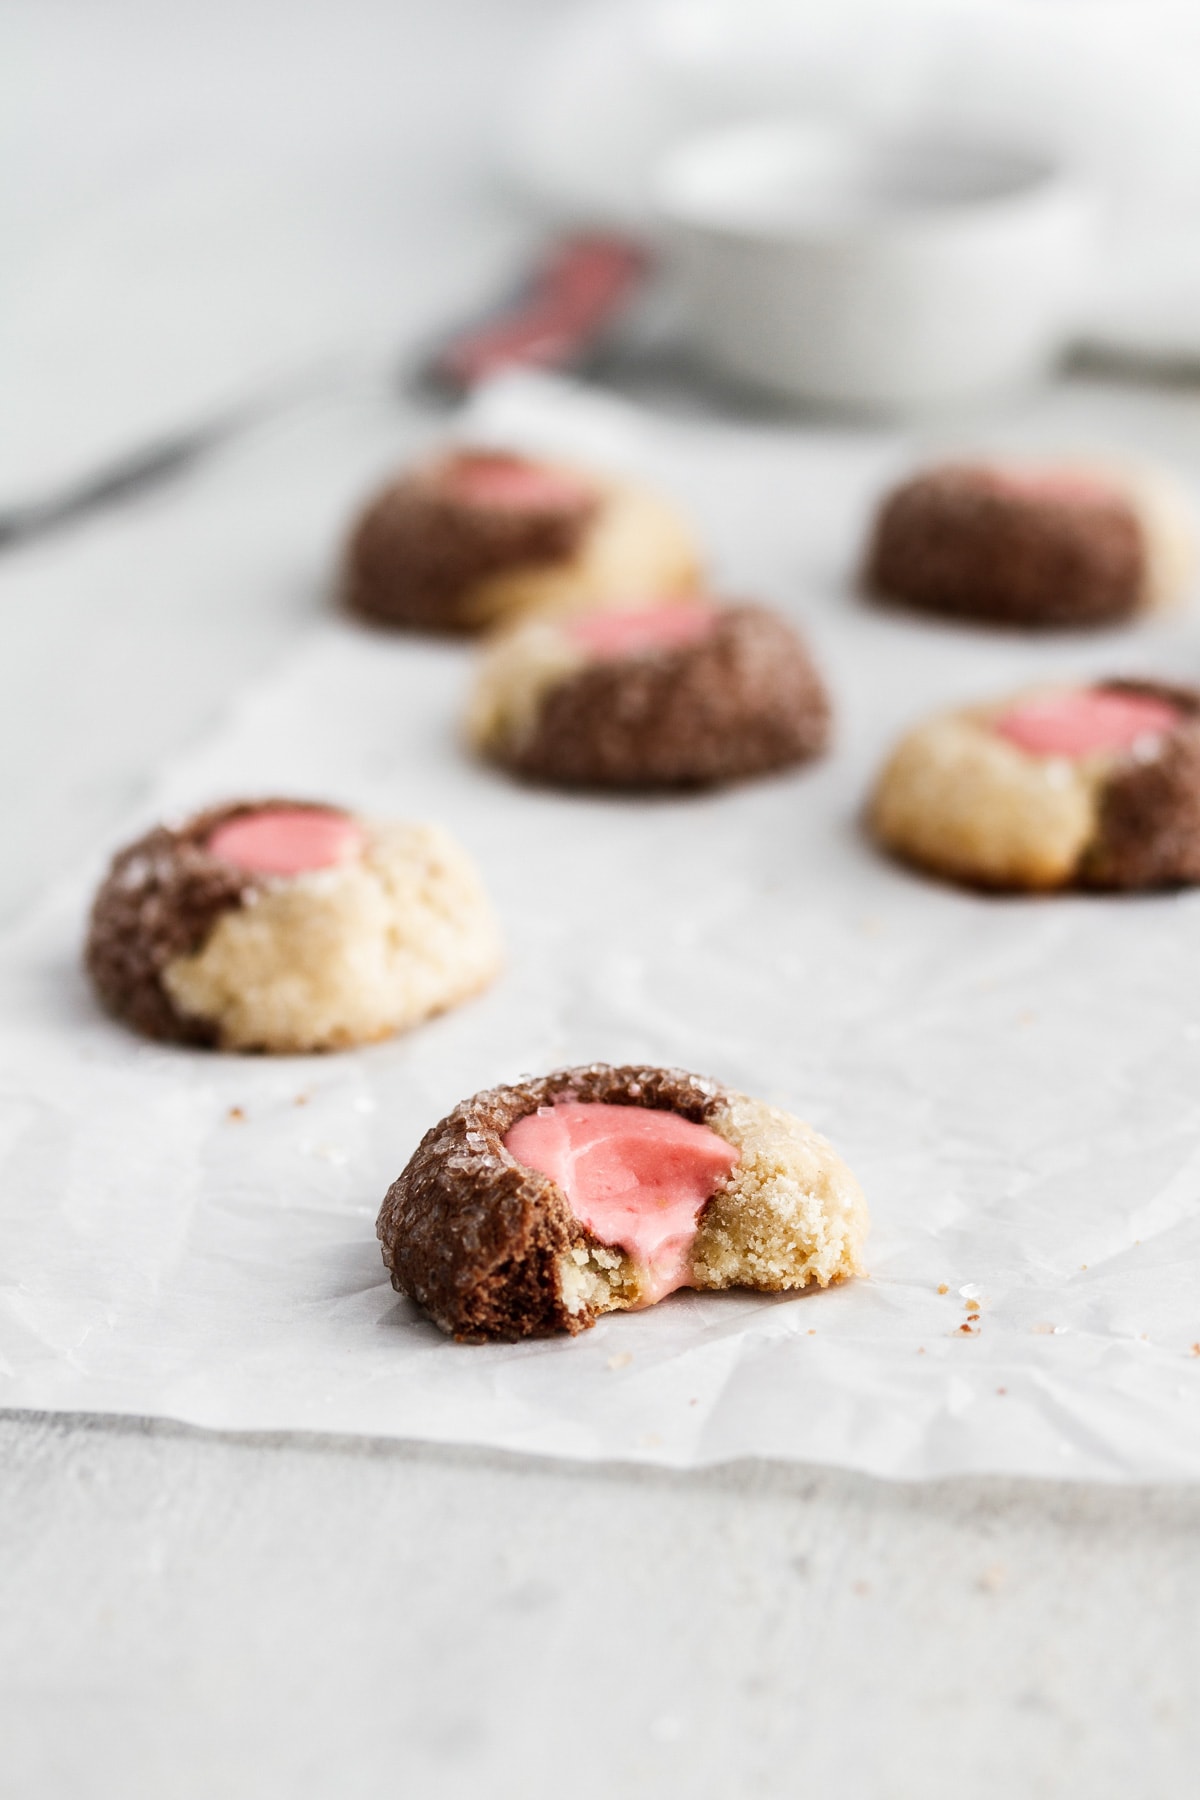 Neapolitan thumbprint cookies on parchment paper with a bite taken out of one